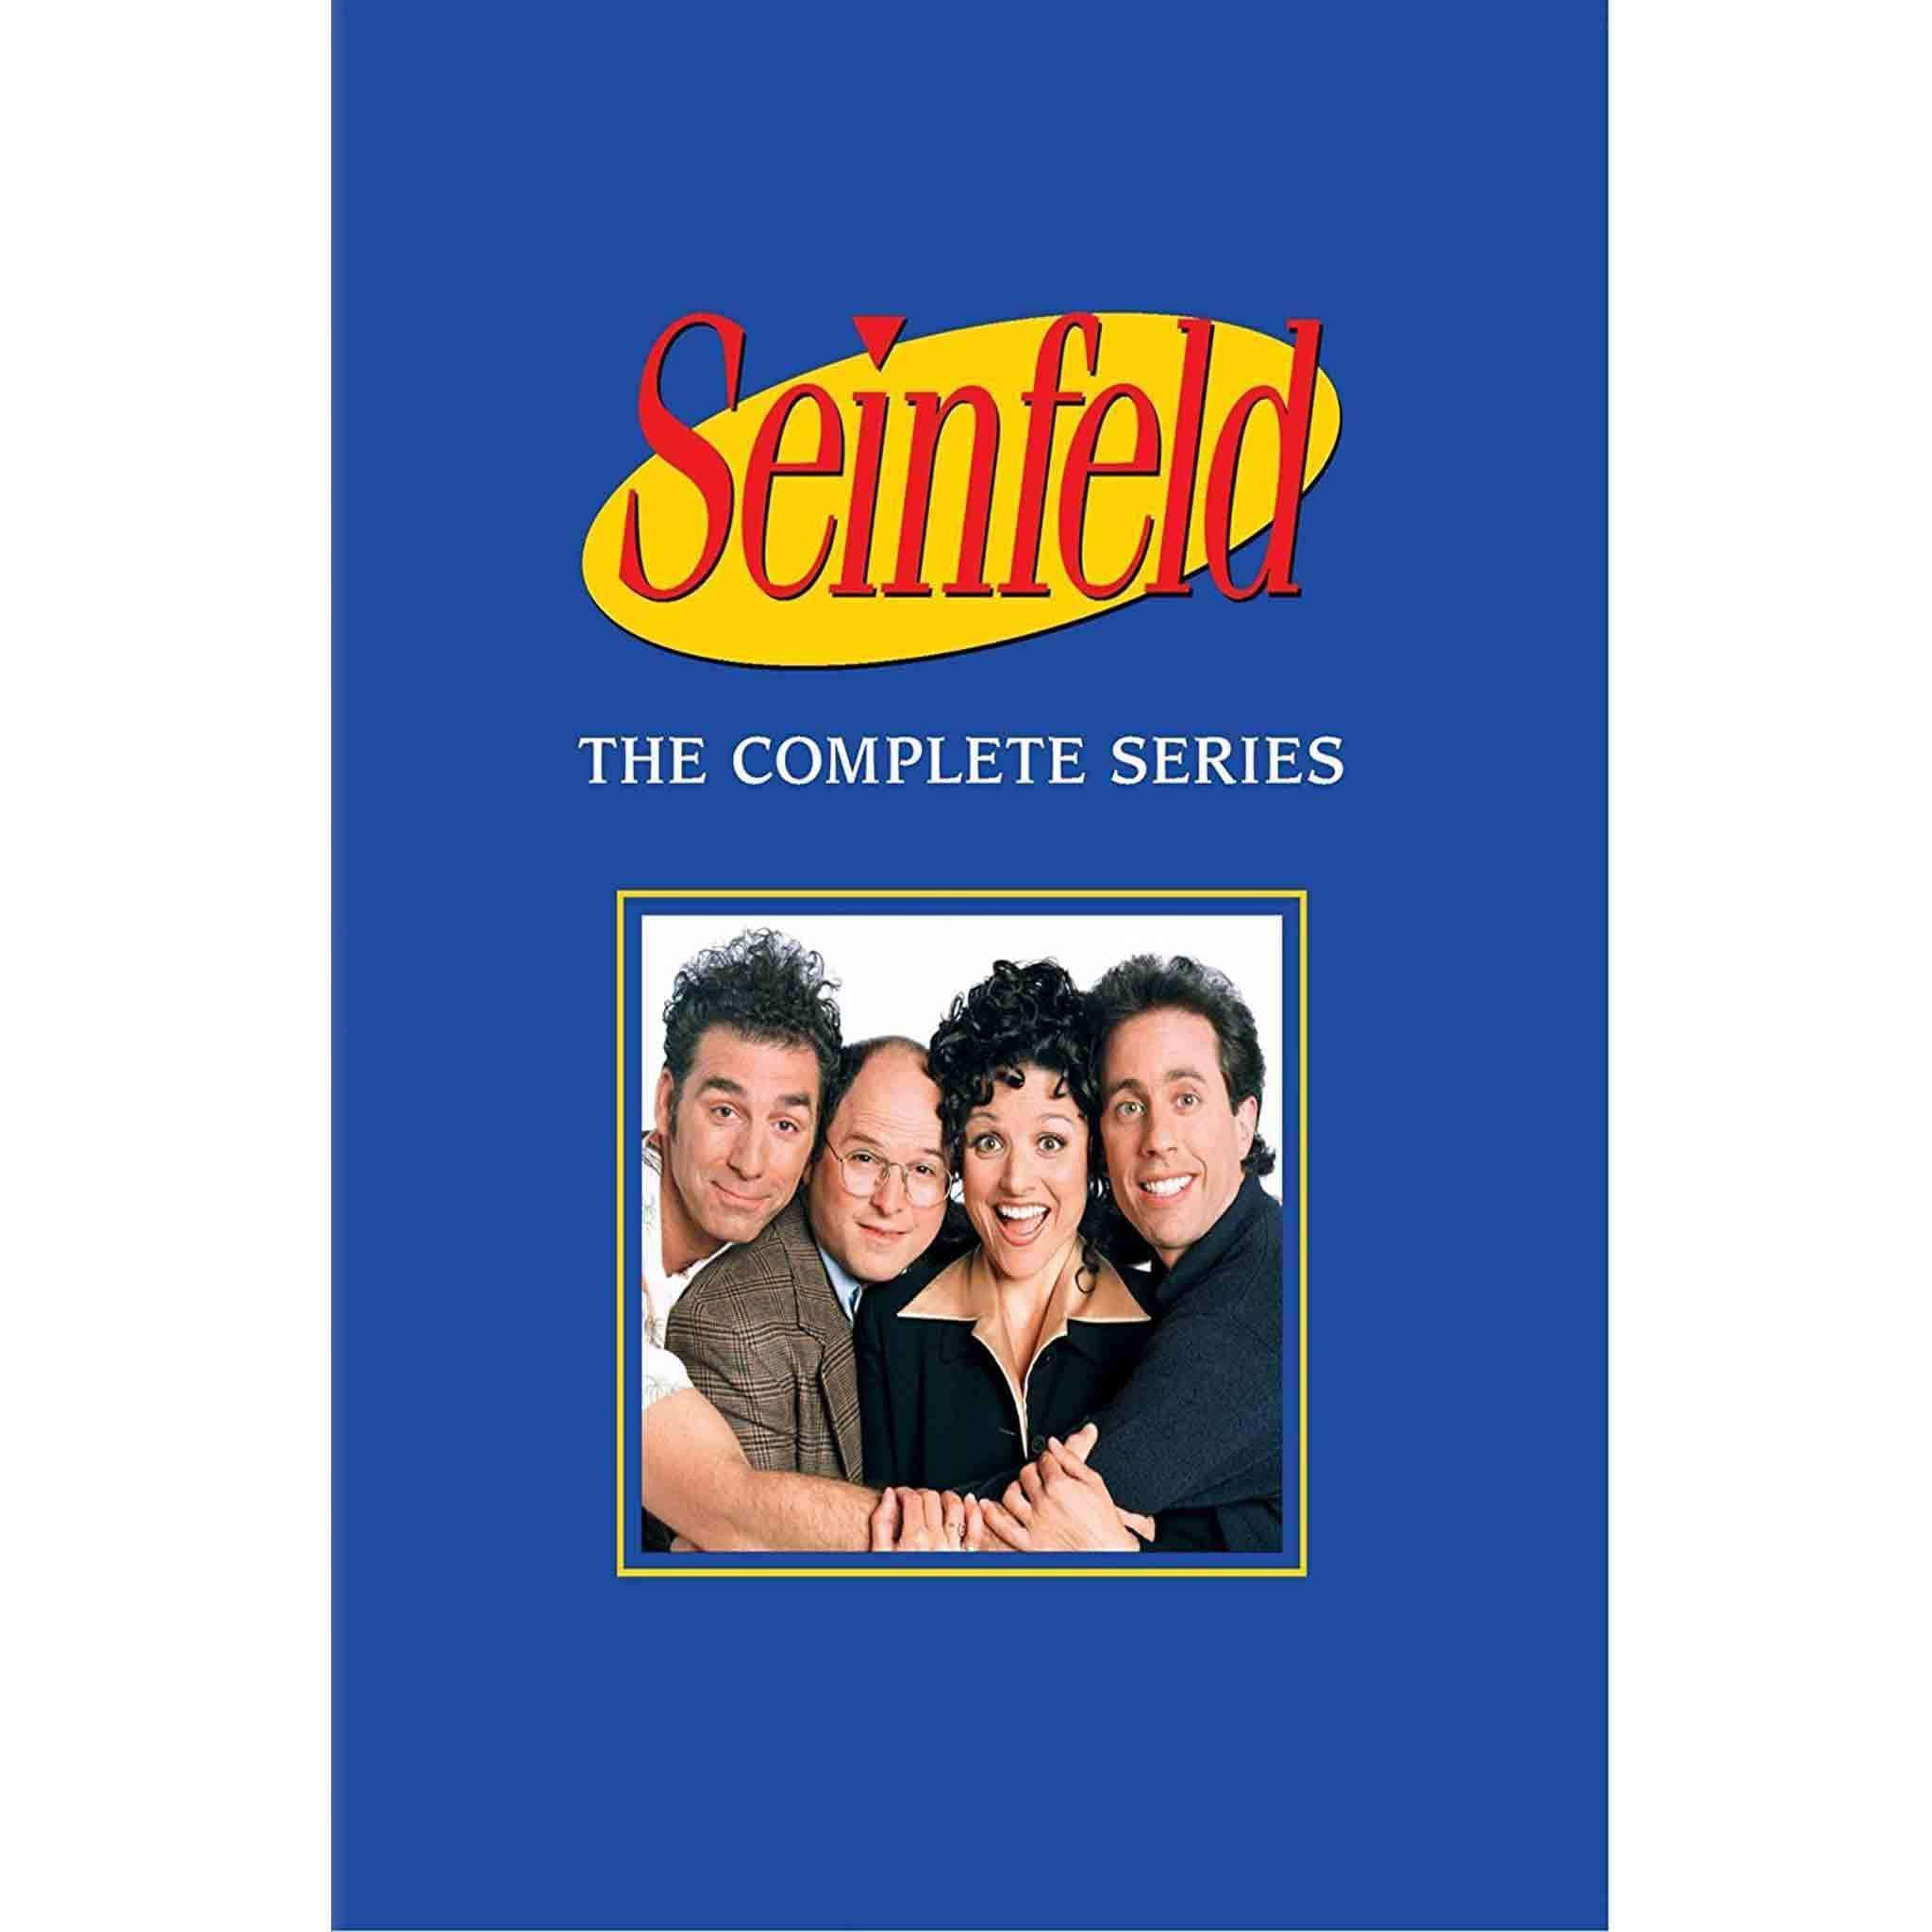 Seinfeld DVD Complete Series Box Set Sony DVDs & Blu-ray Discs > DVDs > Box Sets